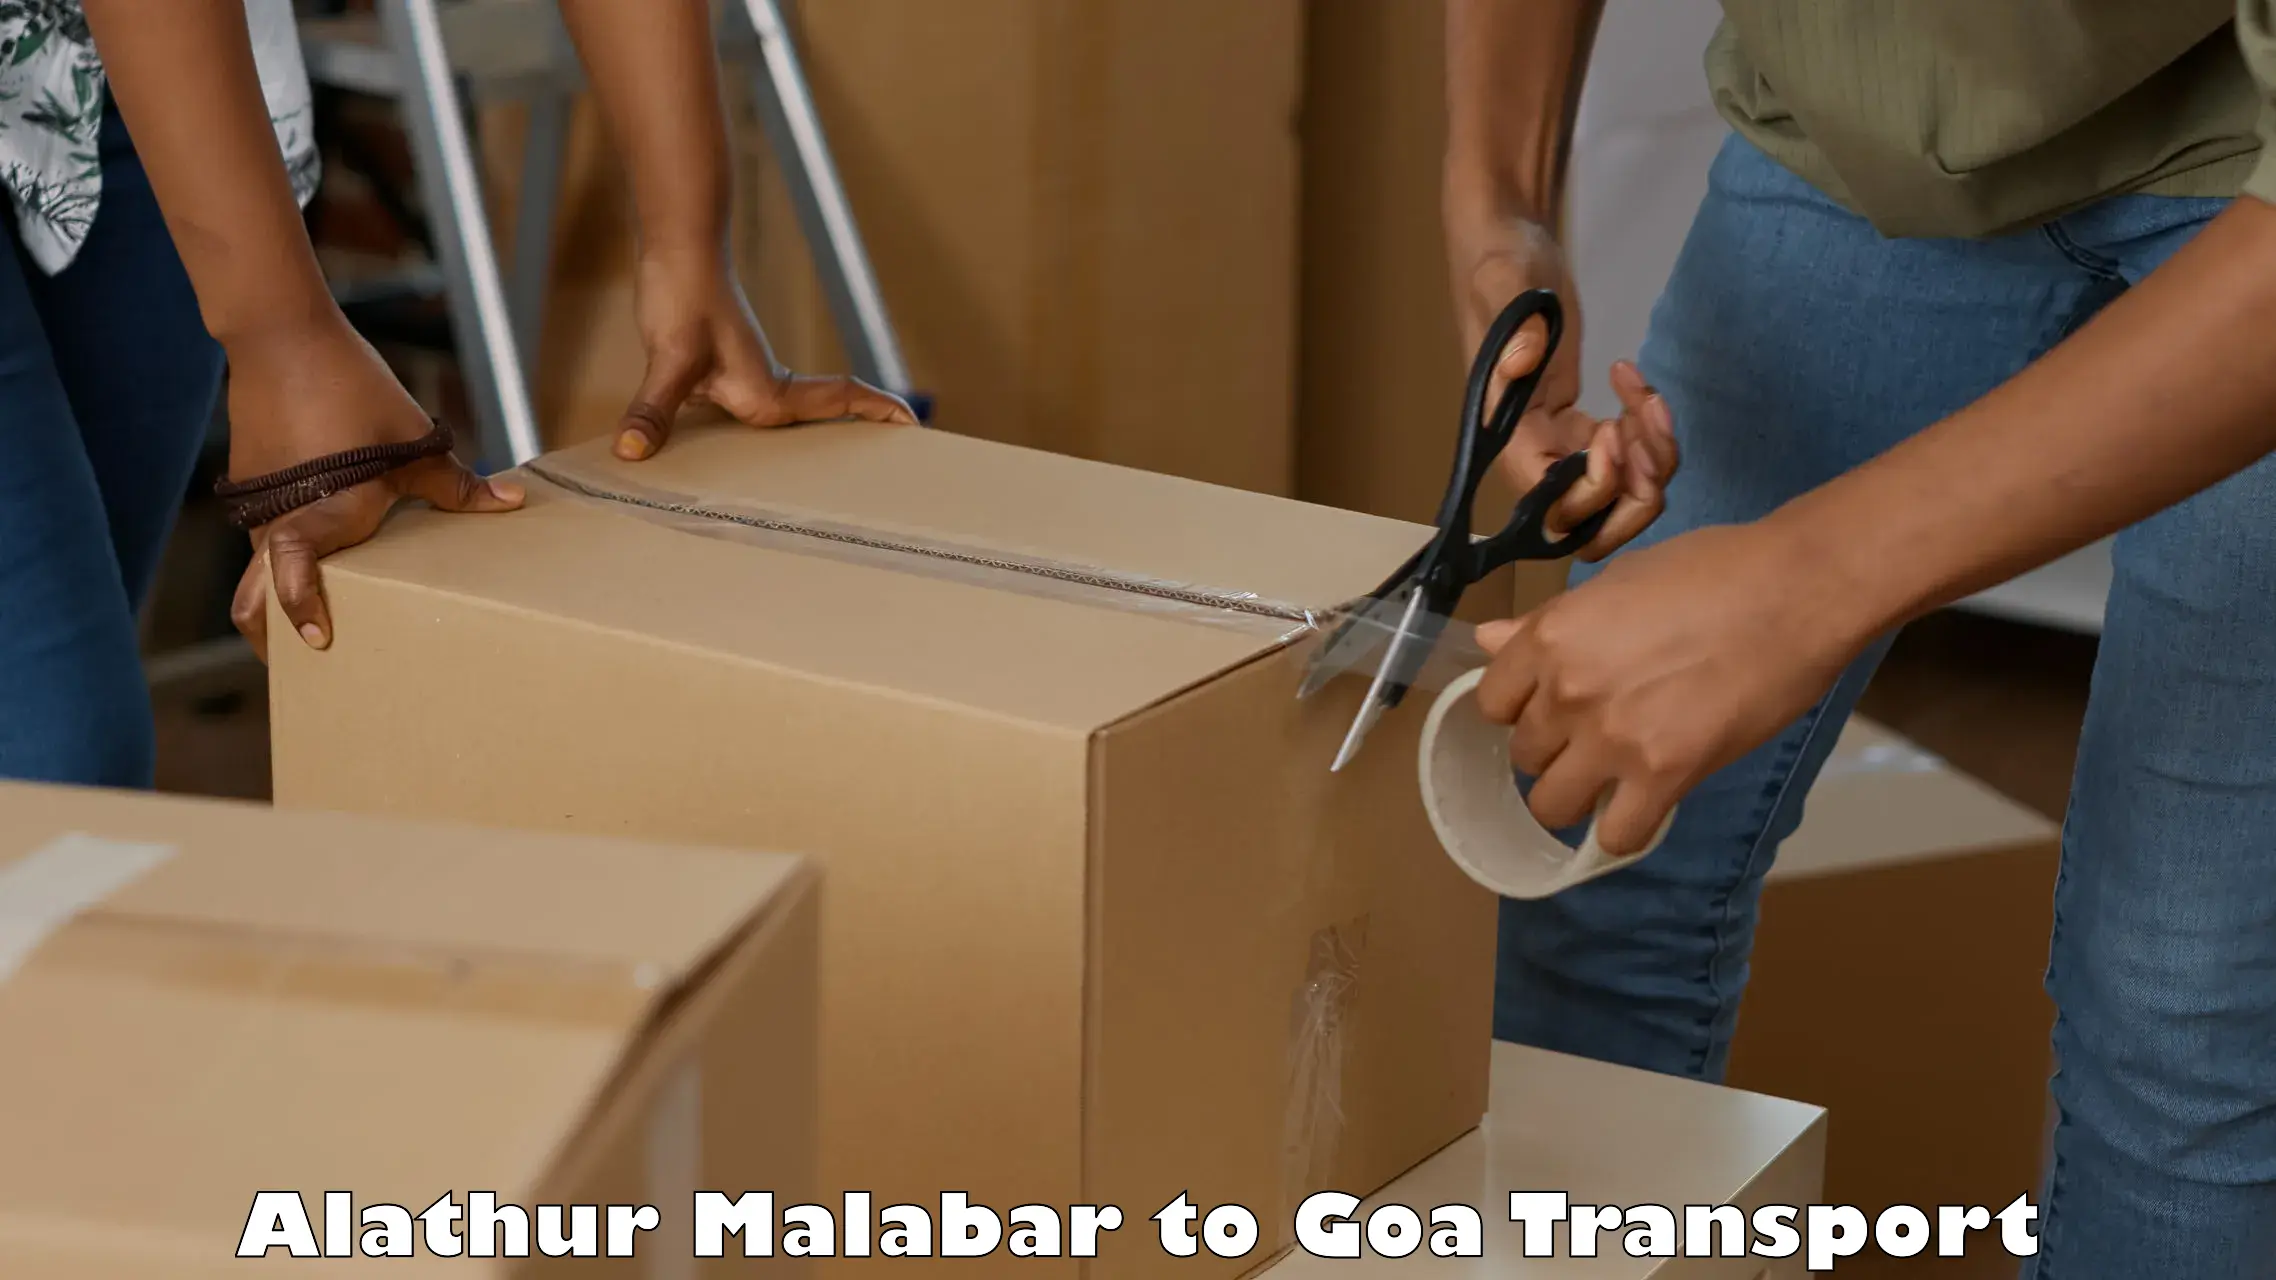 Transport bike from one state to another Alathur Malabar to Mormugao Port